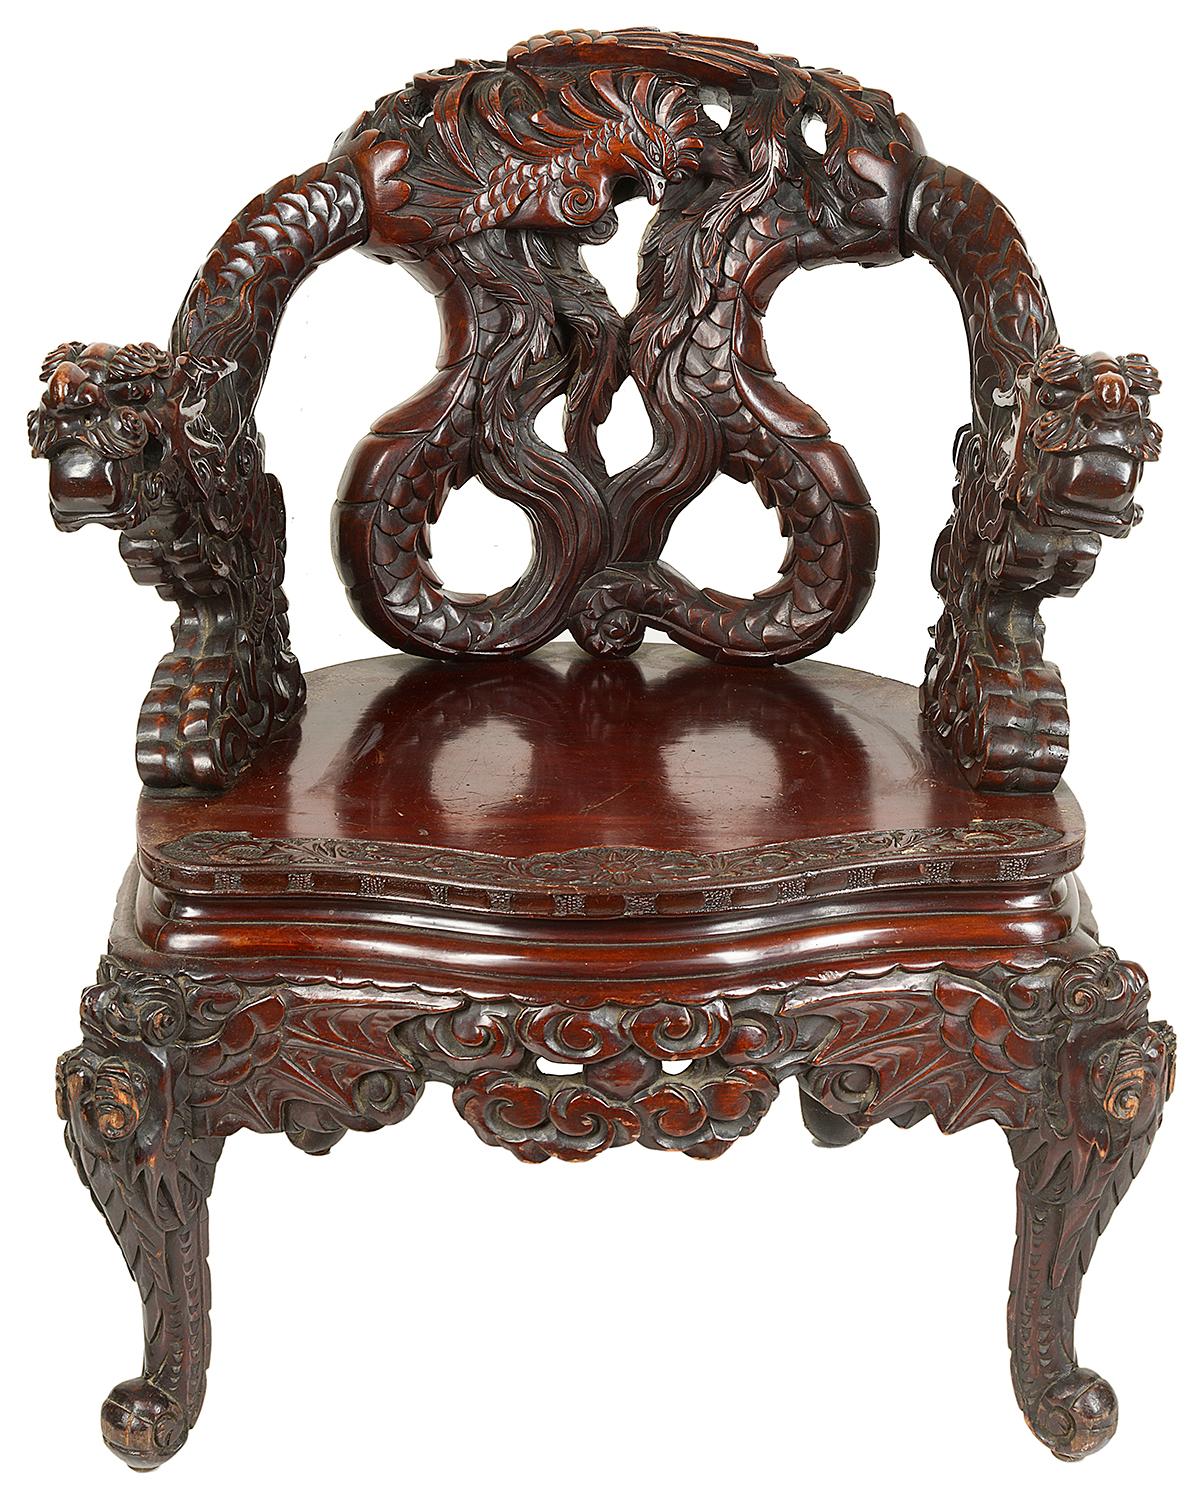 A very dramatic late 19th century Japanese carved softwood armchair. Having mythical dragons entwined to the backrest and arms, raised on carved cabriole legs.